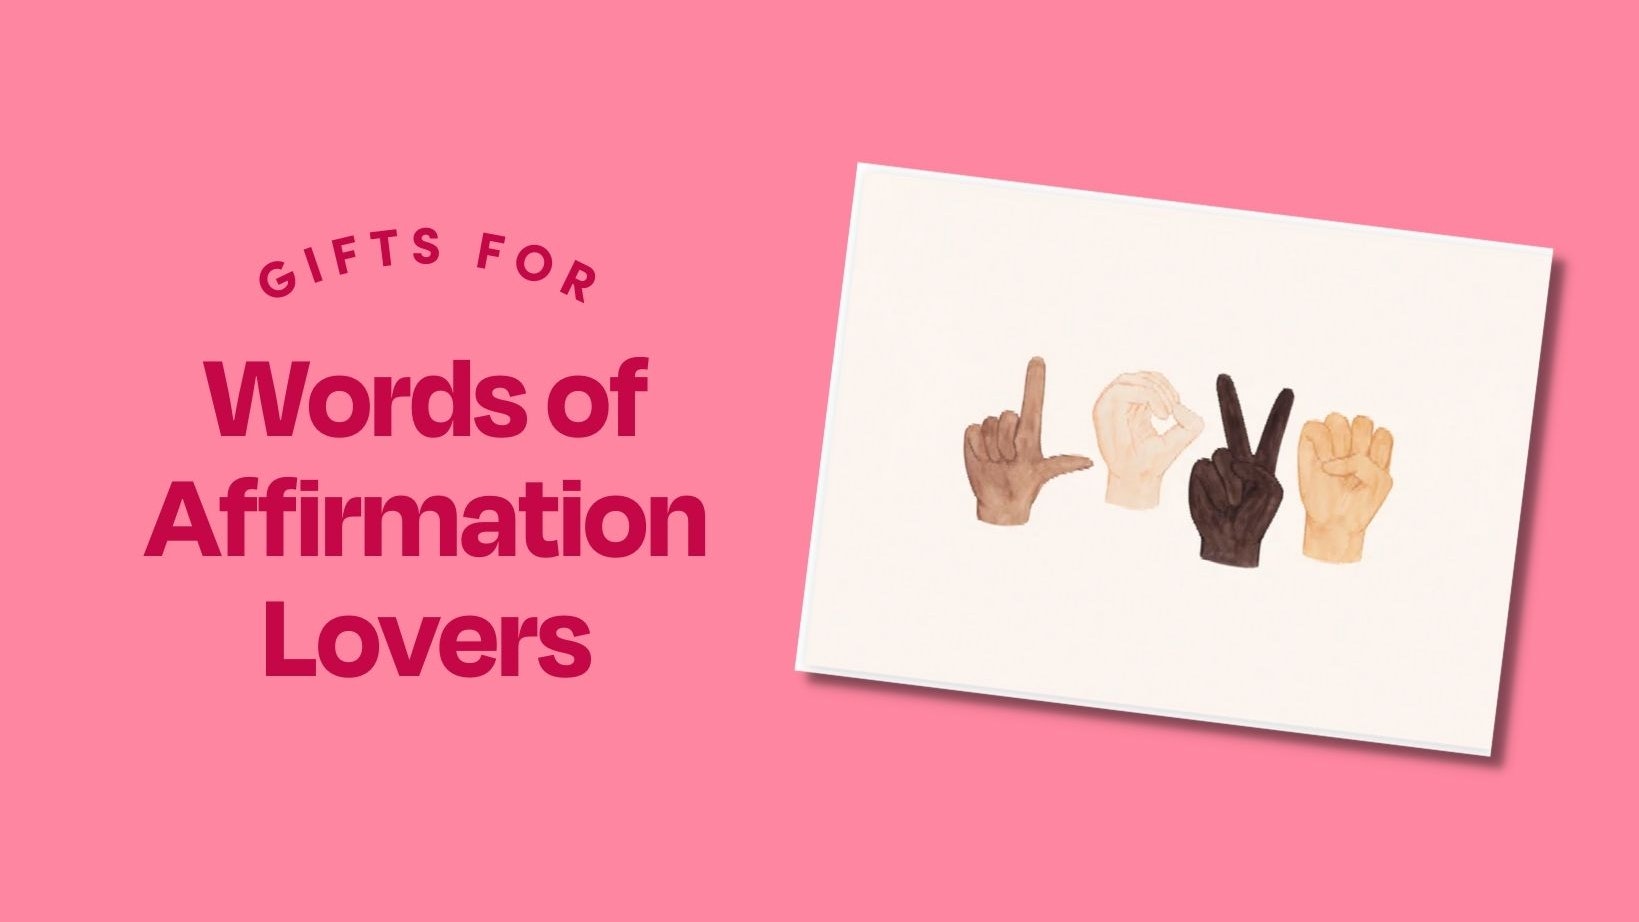 Gifts for Words of Affirmation Lovers